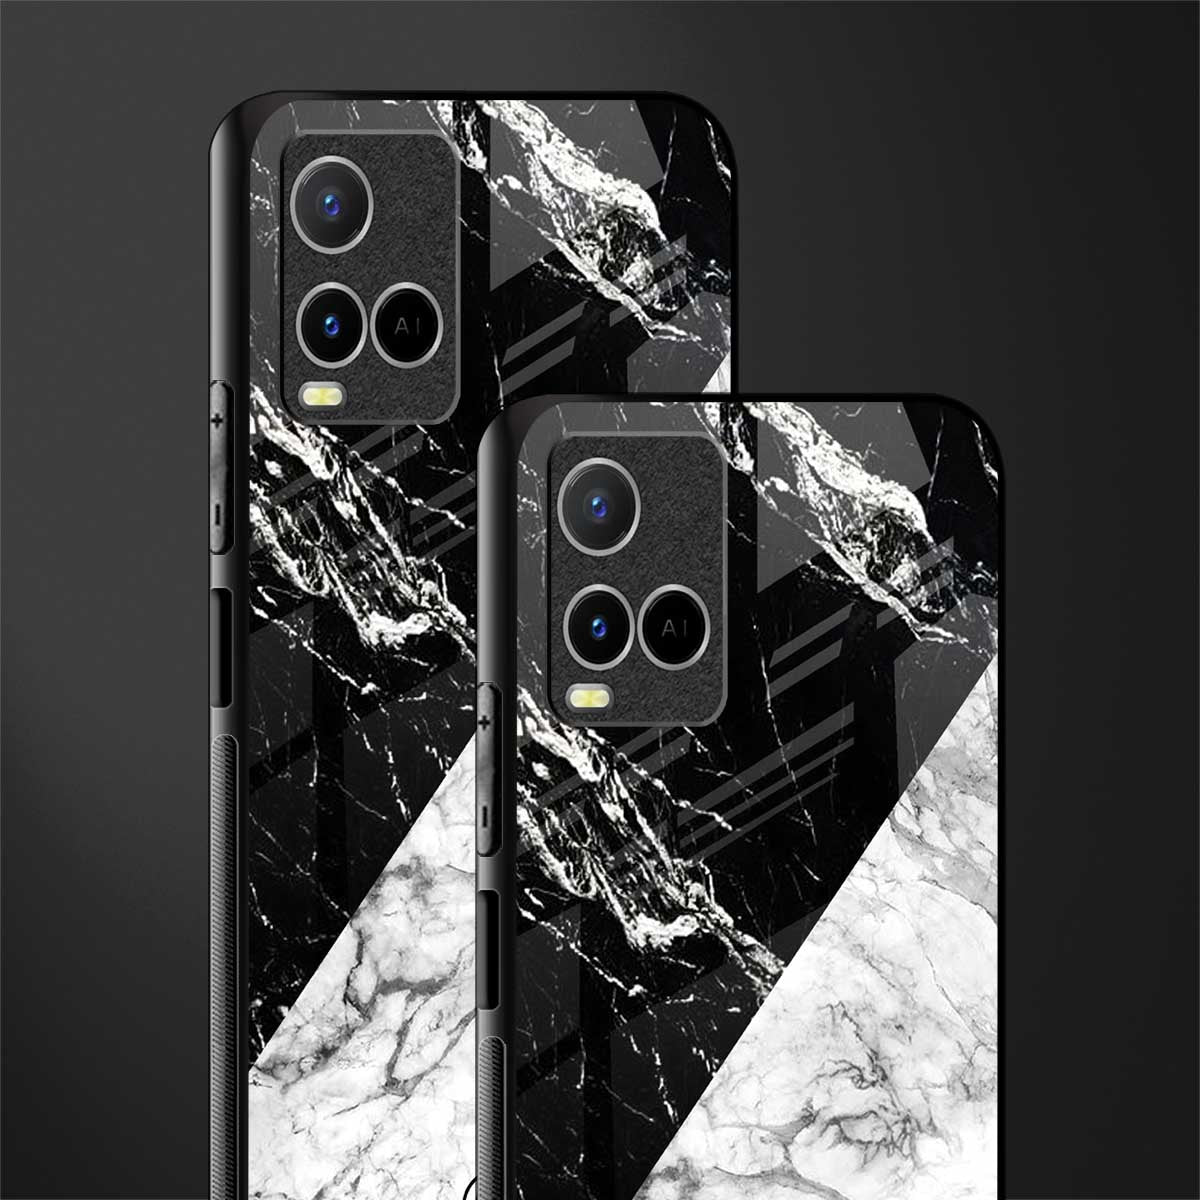 fatal contradiction phone cover for vivo y21